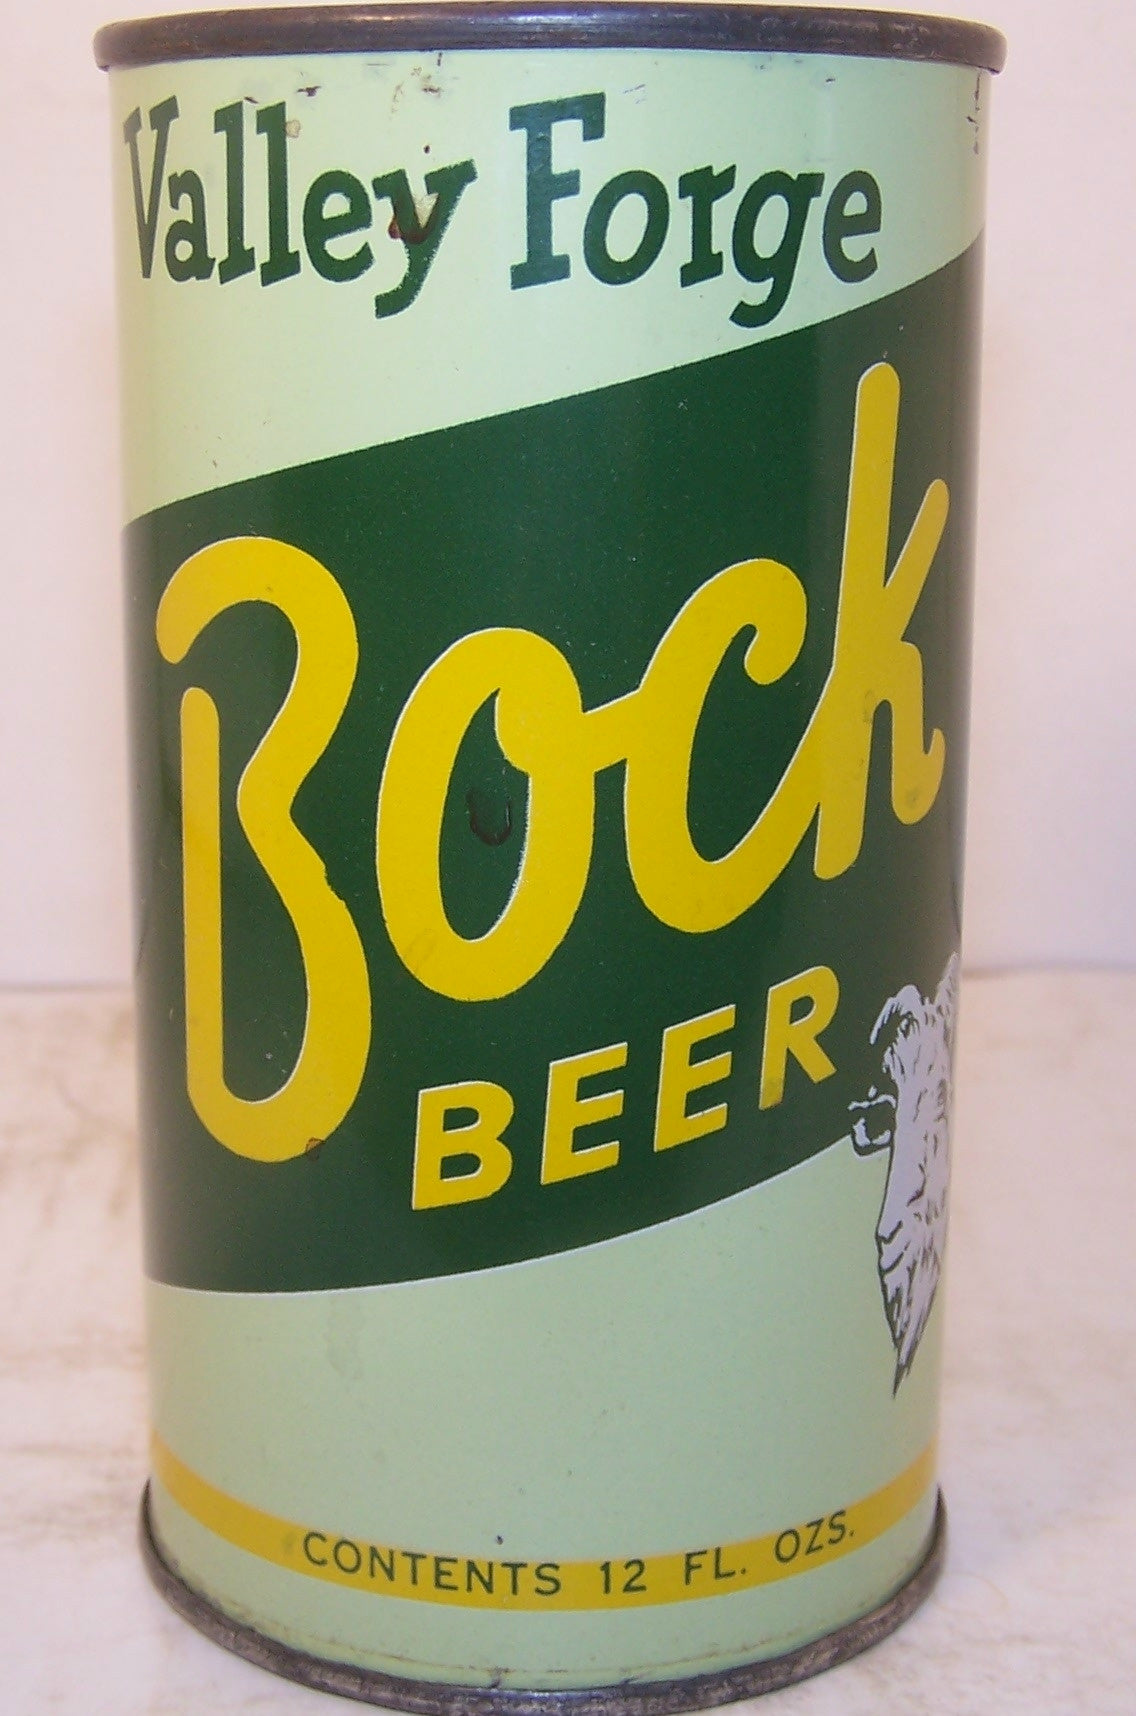 Valley Forge Bock Beer, USBC 143-9 (Valley Forge in Green Letters) Grade 1